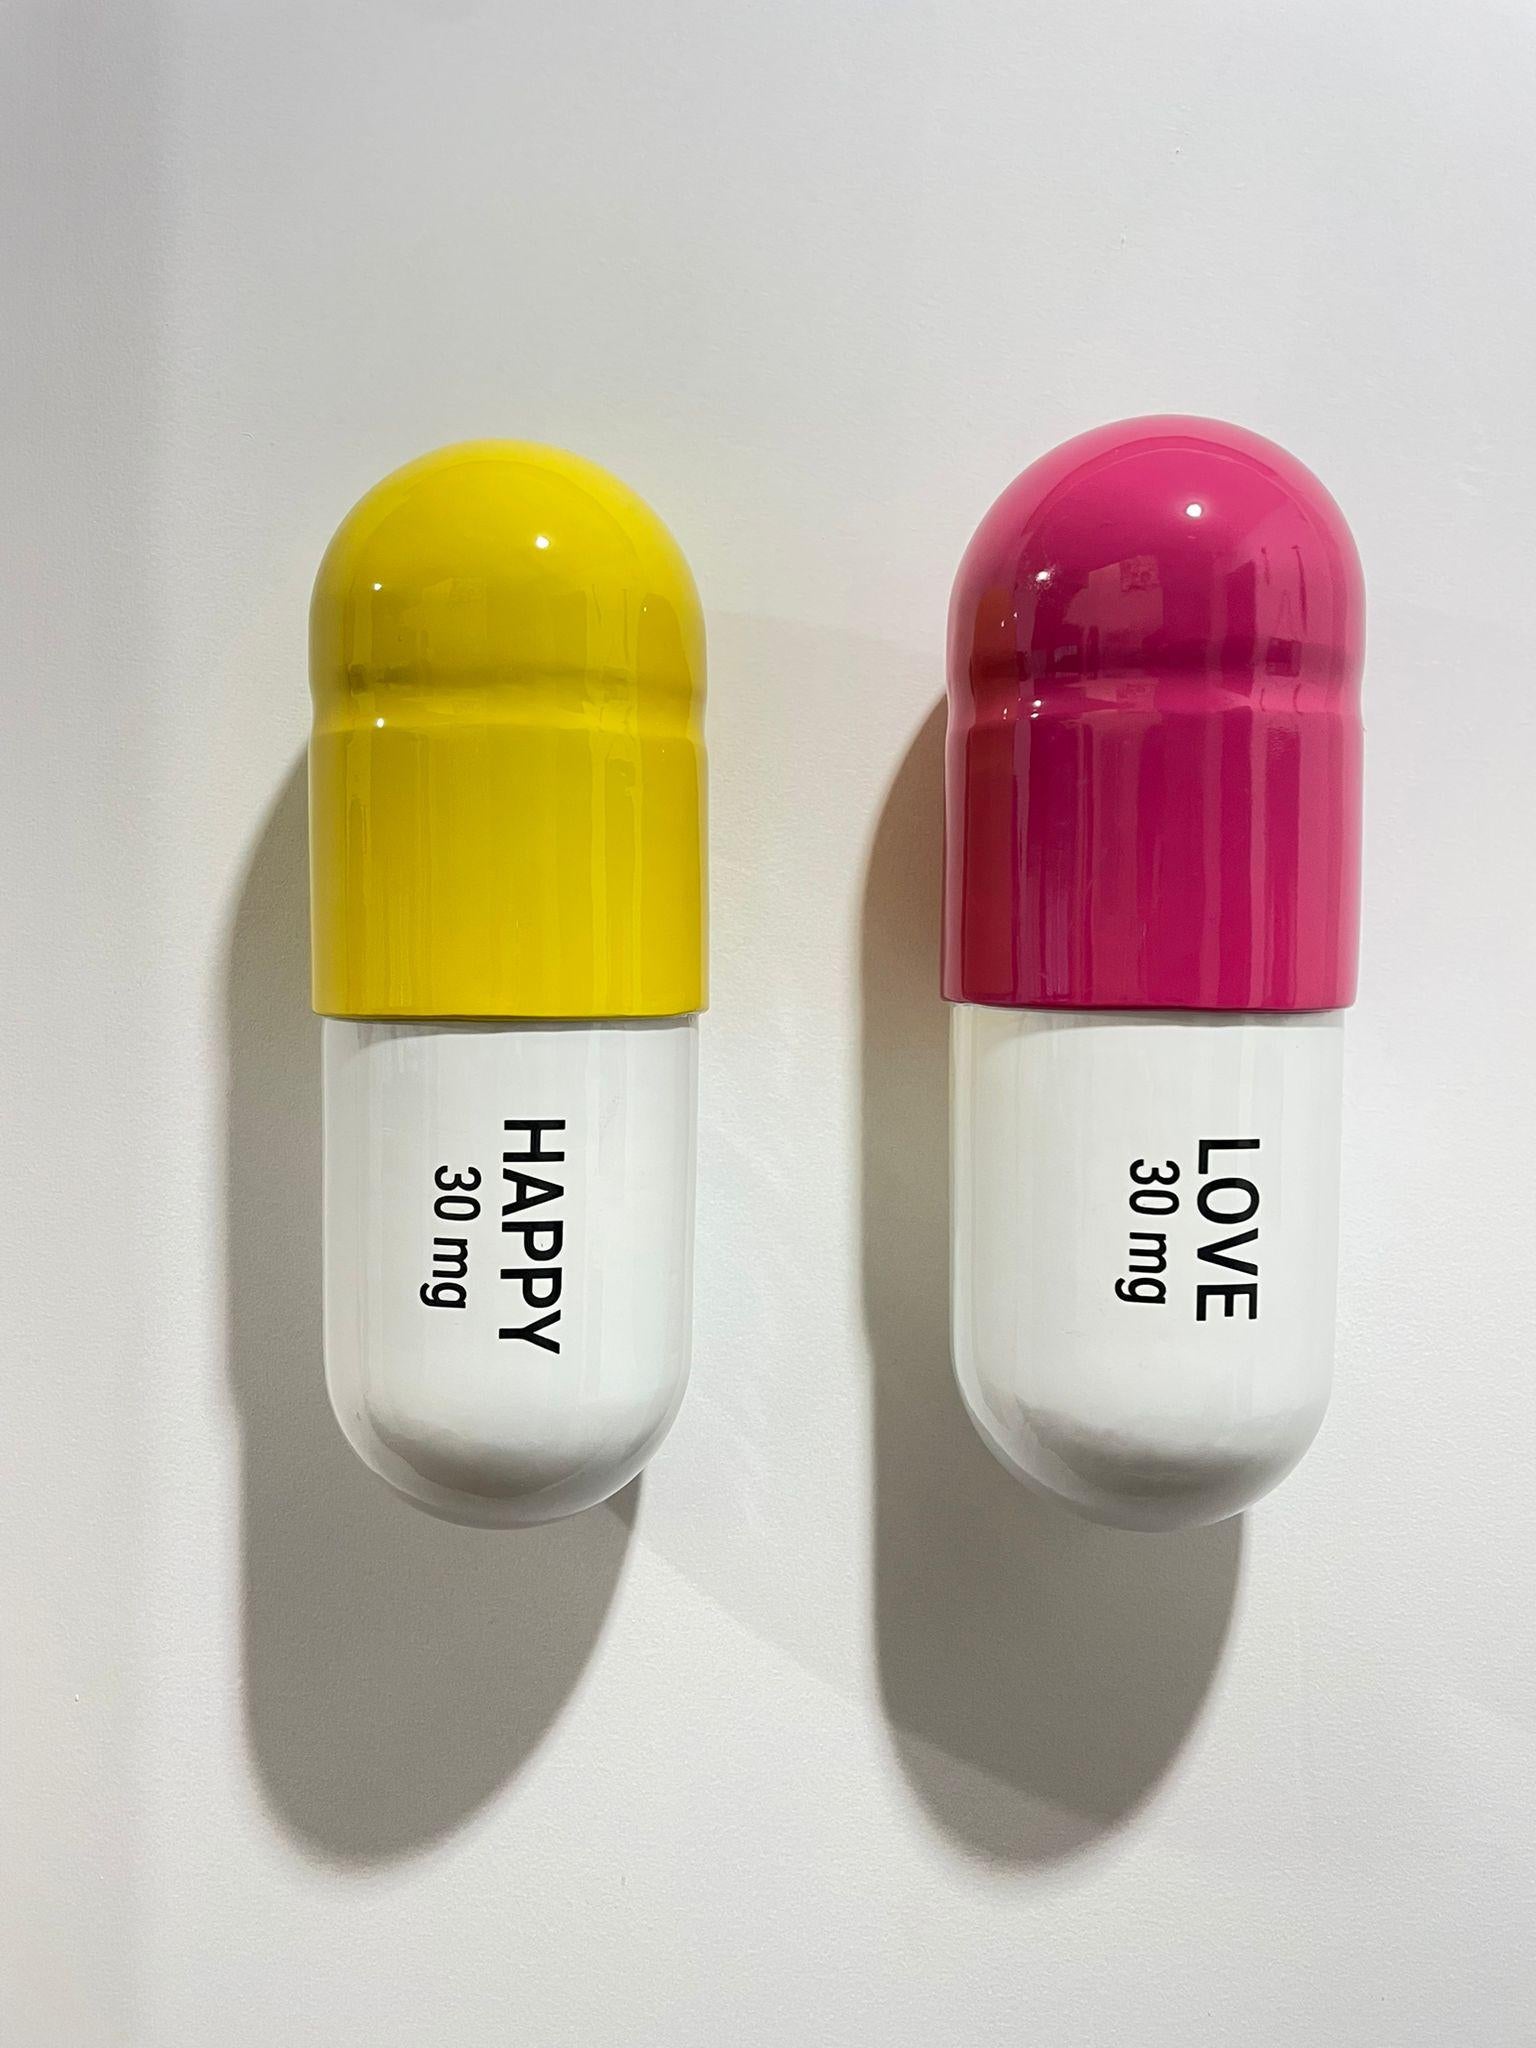 Tal Nehoray Figurative Sculpture - 30 MG Love Happy pill Combo (Yellow, magenta pink) - figurative sculpture